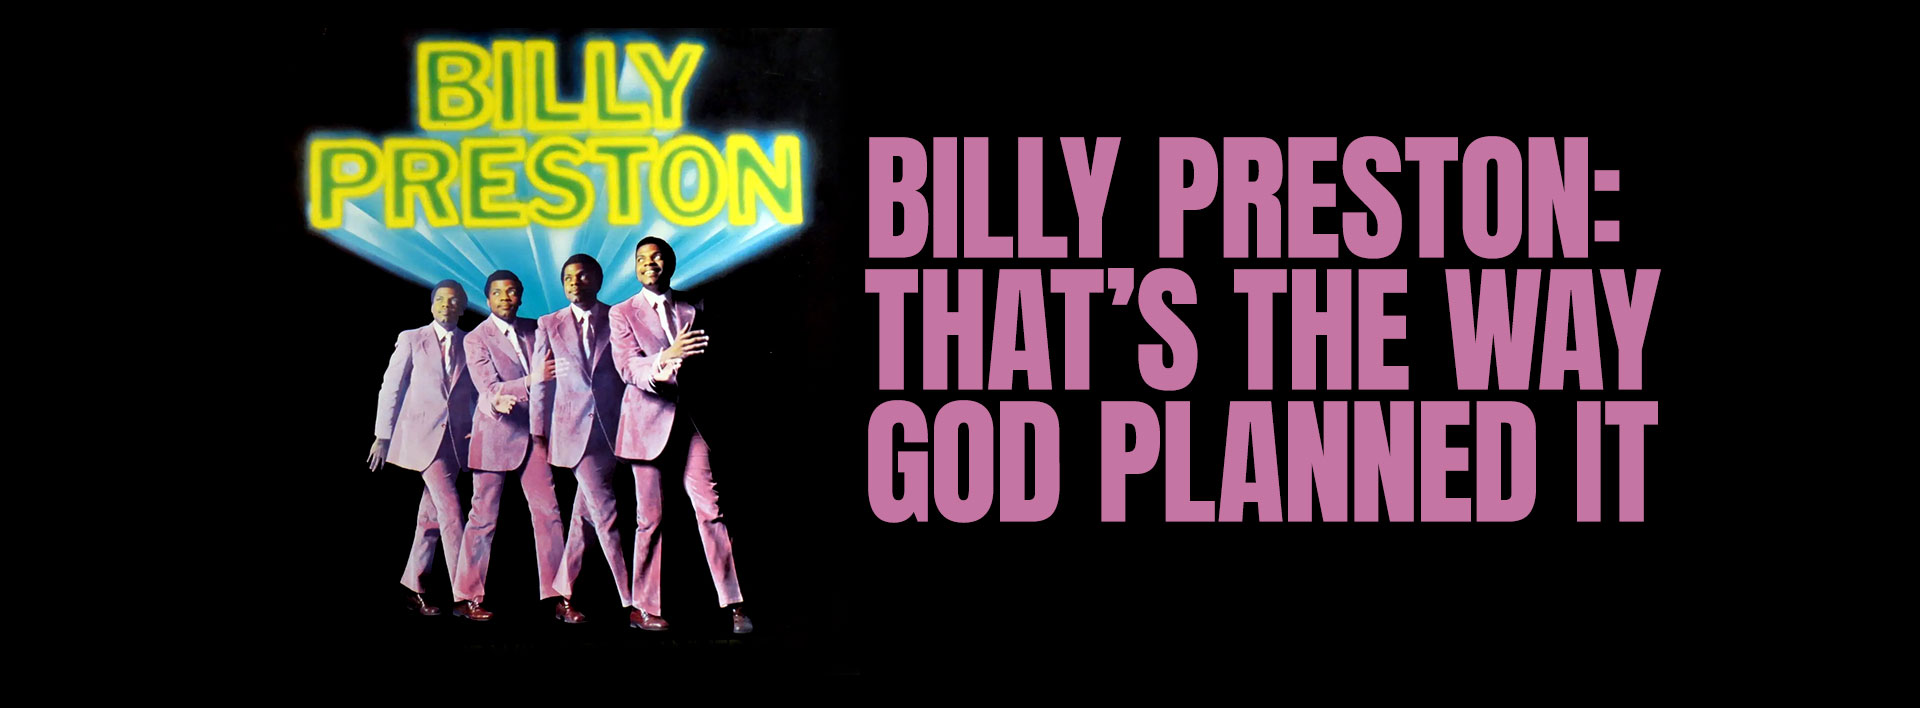 BILLY PRESTON: THAT'S THE WAY GOD PLANNED IT